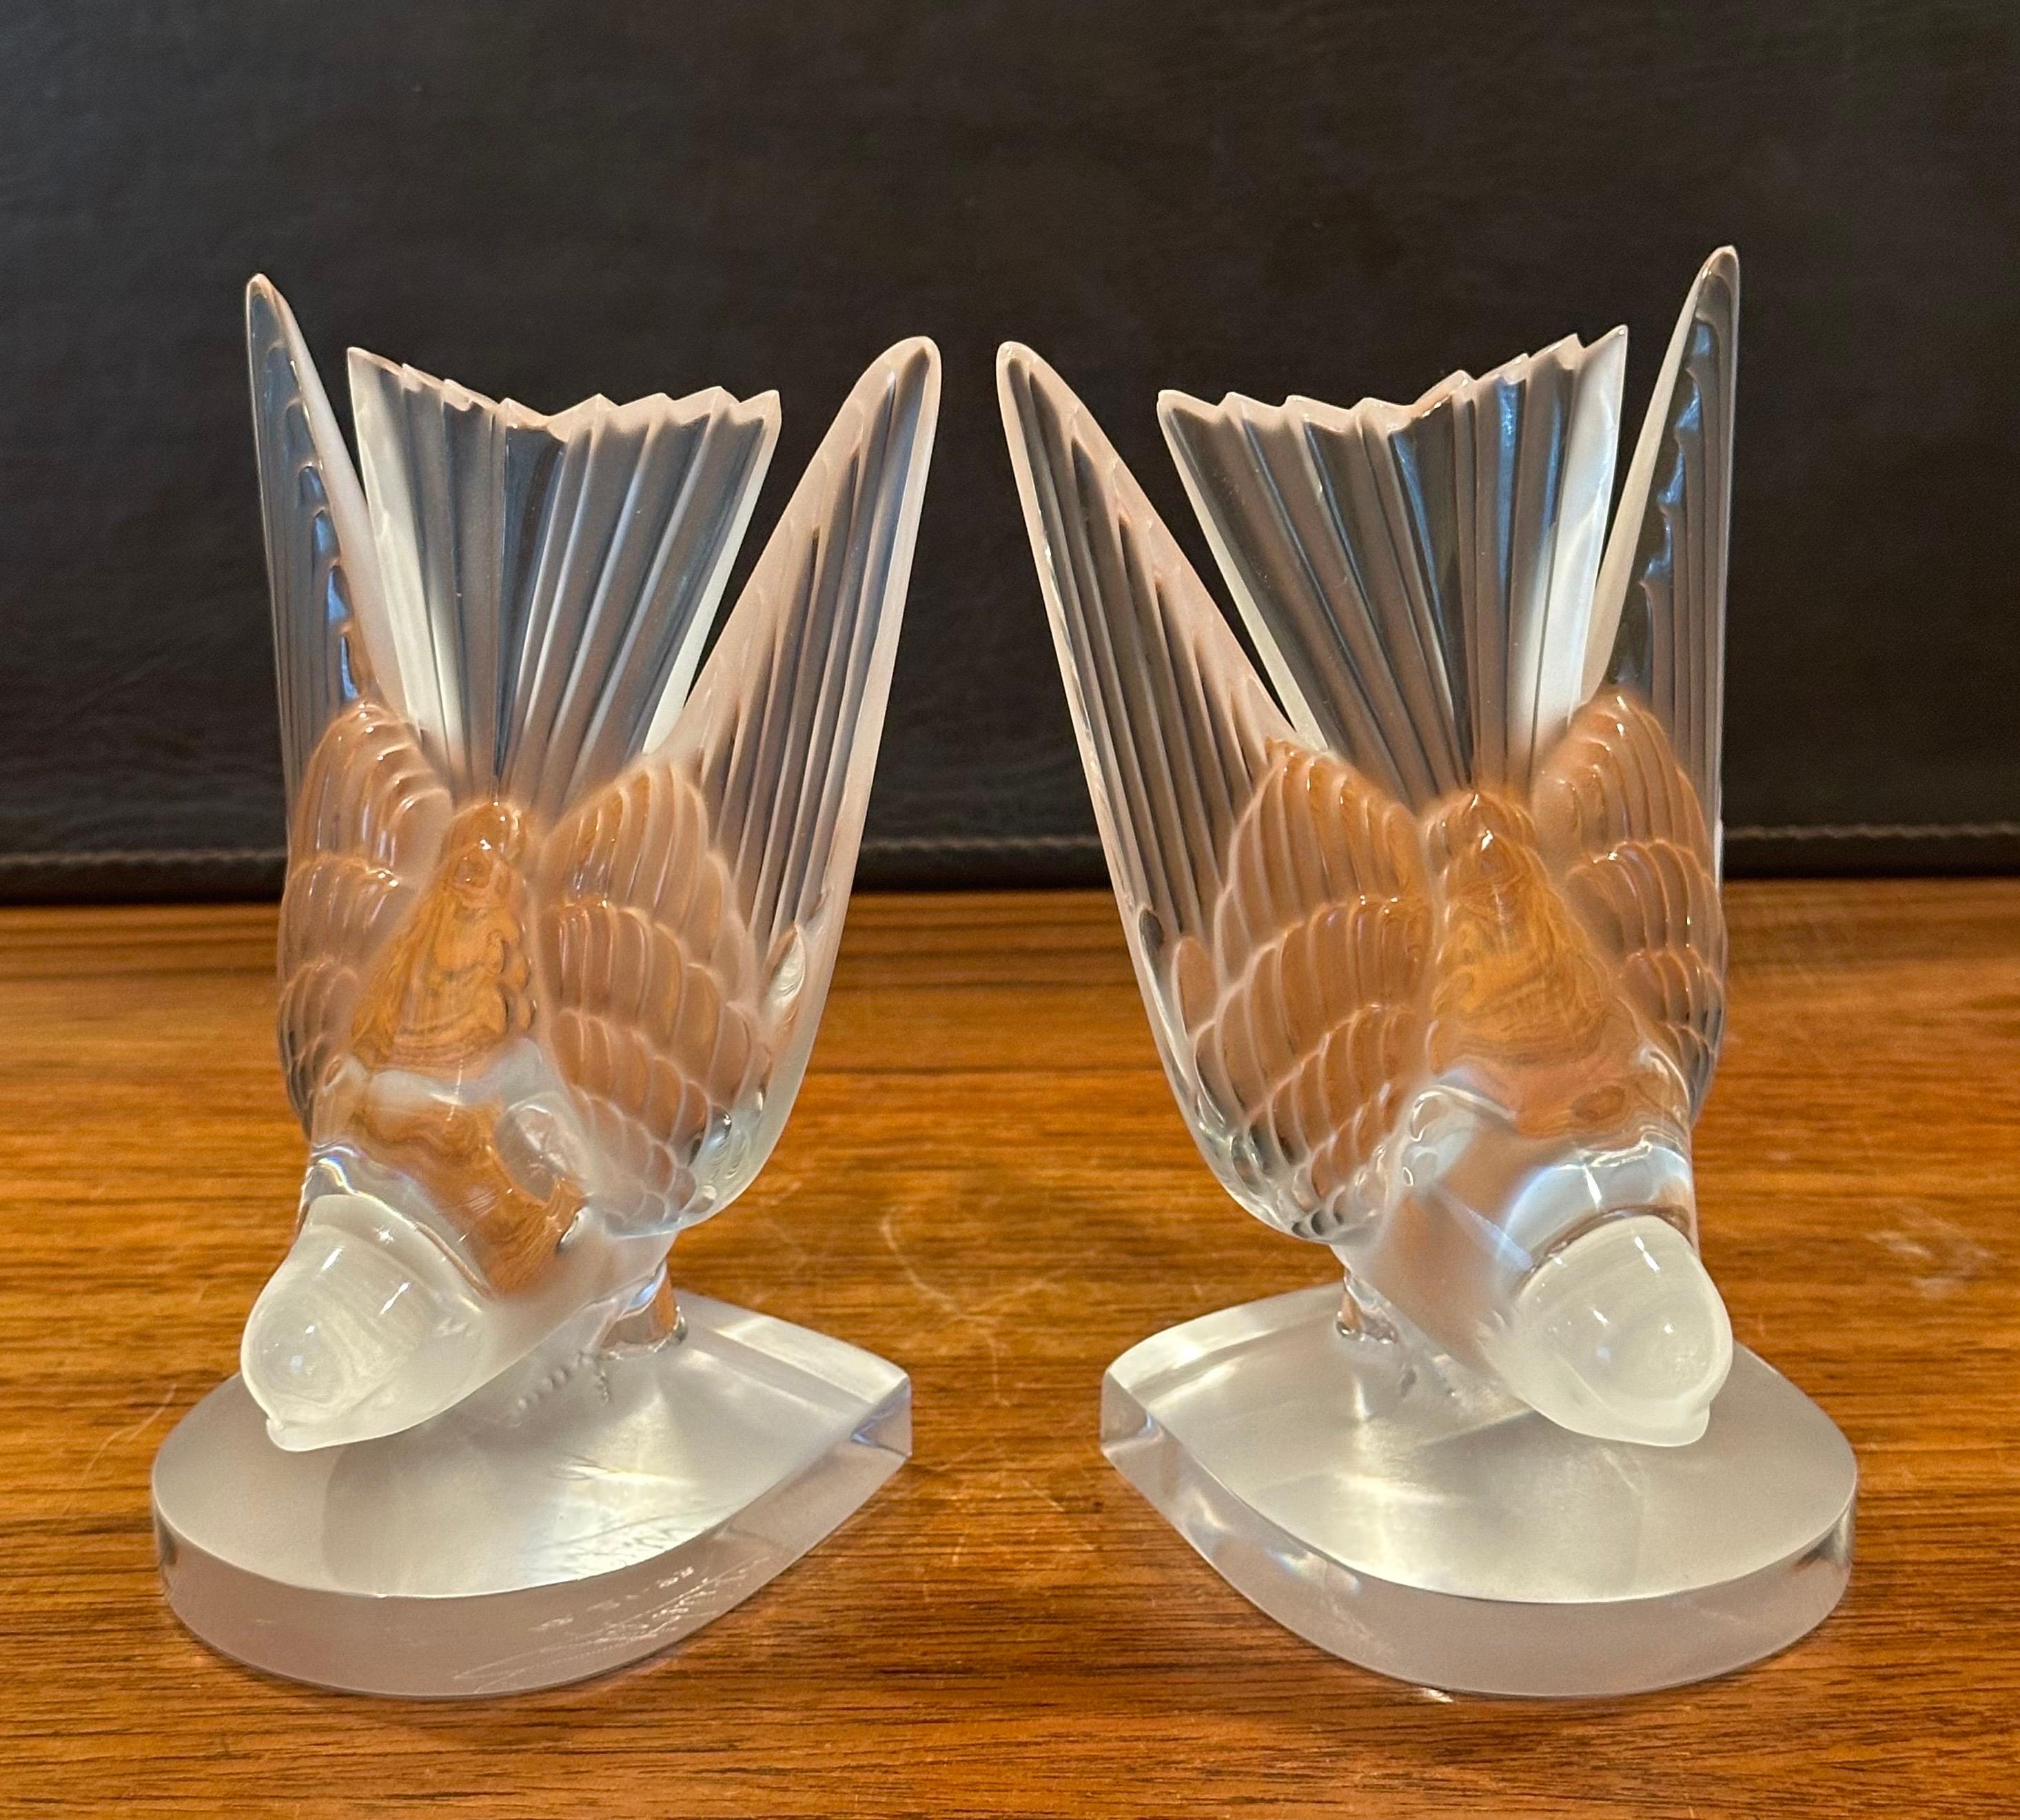 Pair of Frosted Crystal Hirondelle / Swallow Bookends by Lalique of France For Sale 2